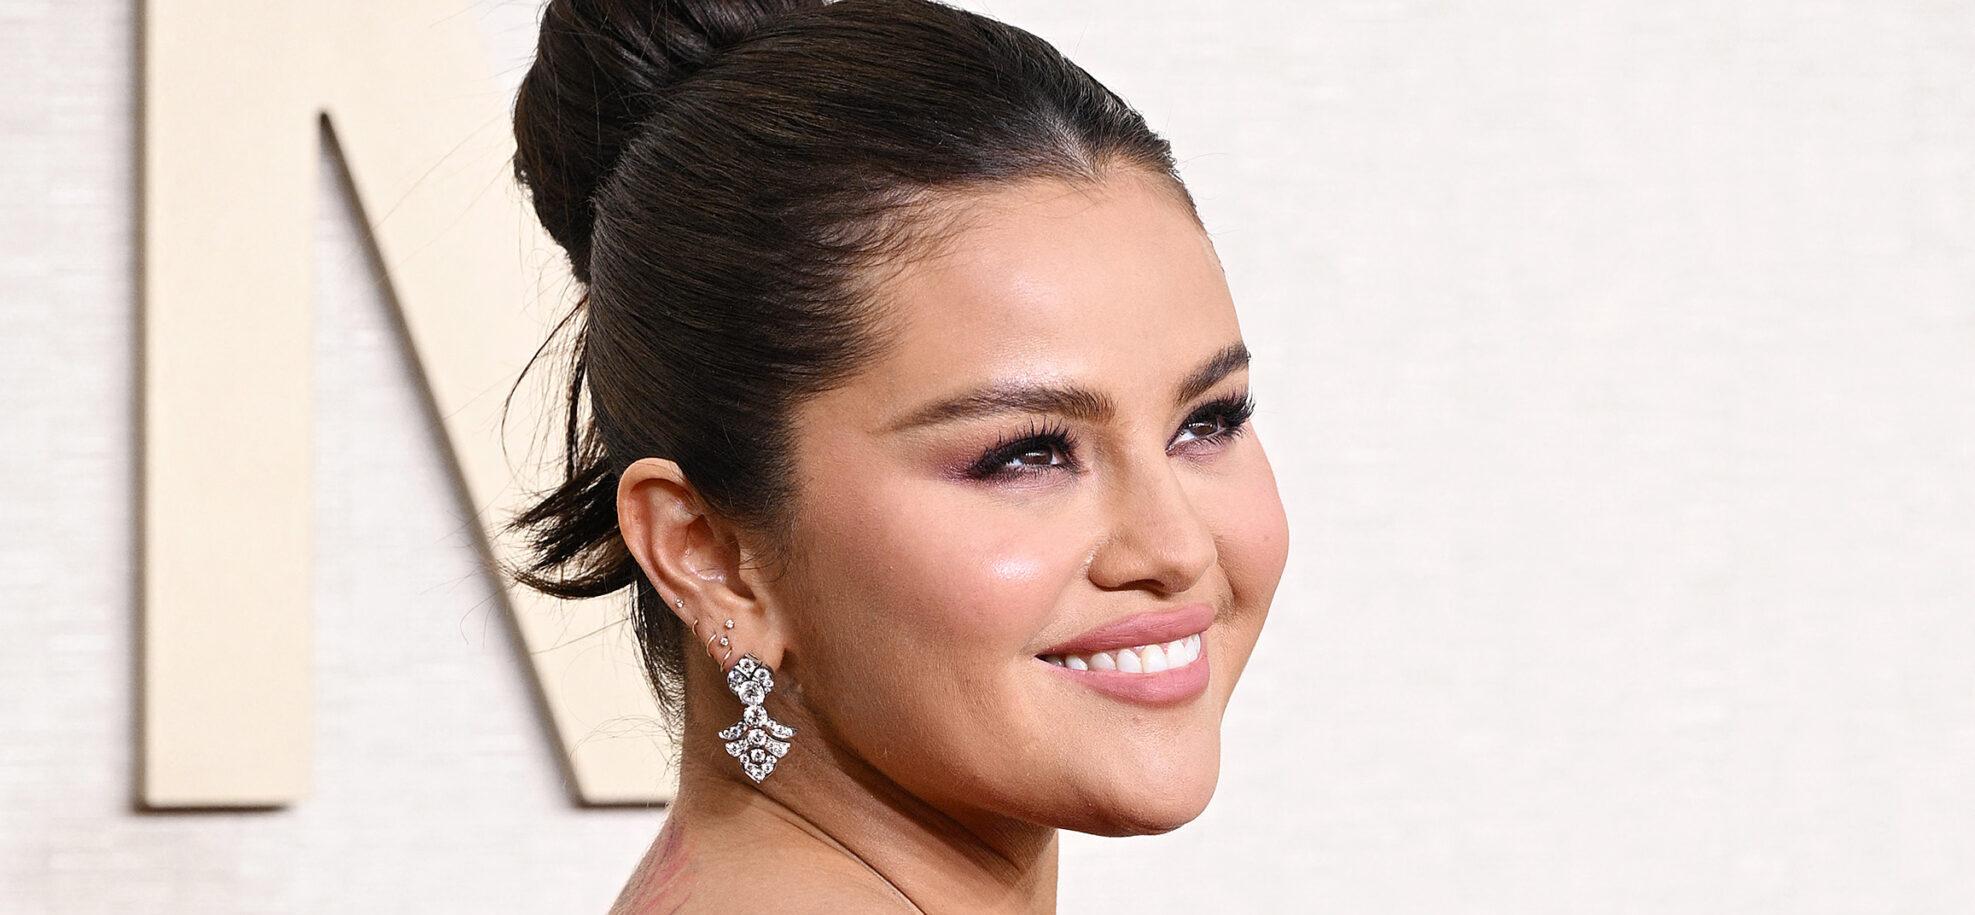 Selena Gomez Finally Reveals The Tea She Spilled At The Golden Globes